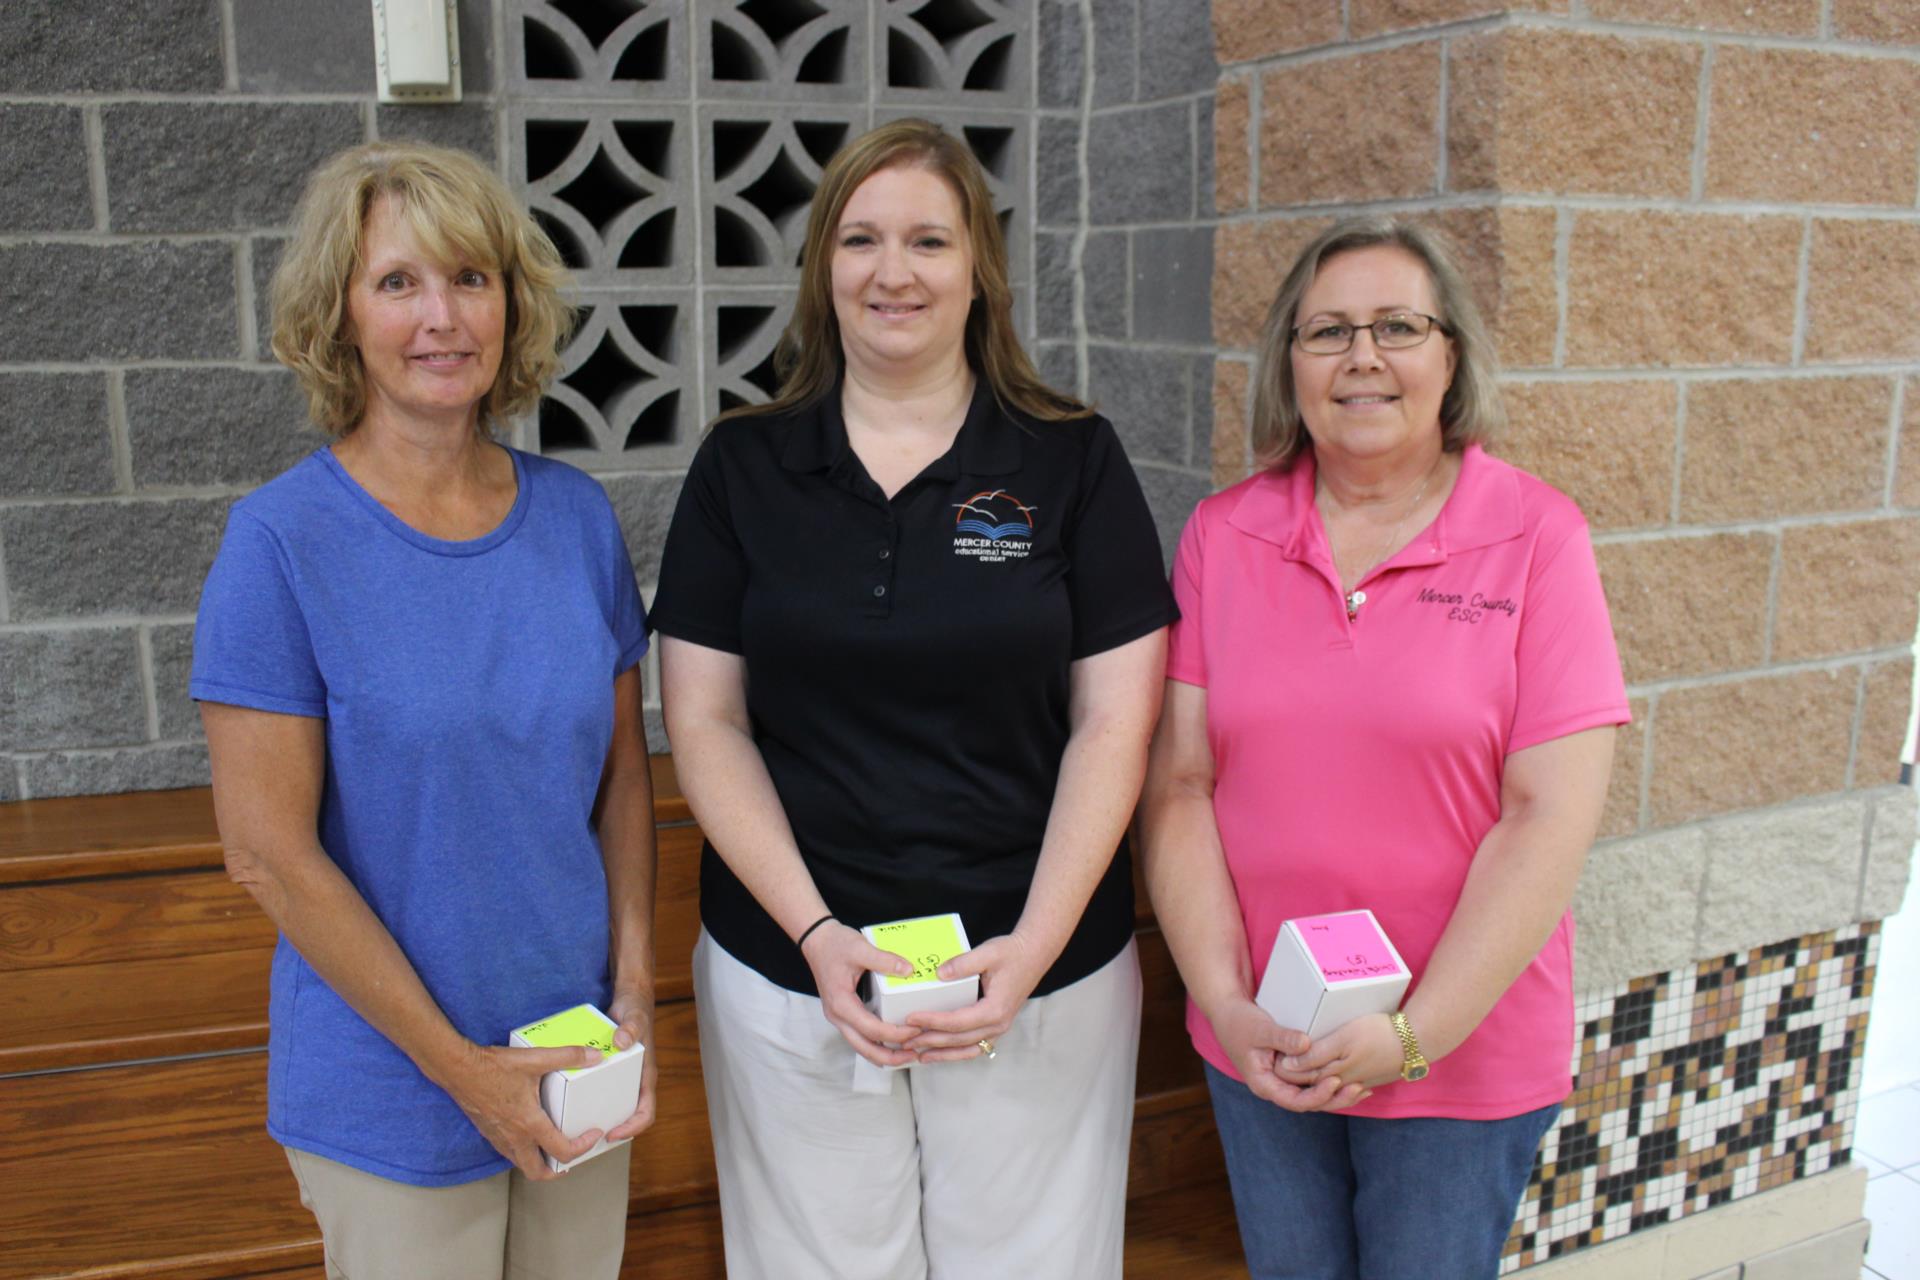 Five Years of Service: Kristy Vogel, Angie Fiely and Christa Fullenkamp  Not pictured: Lindsey Sell